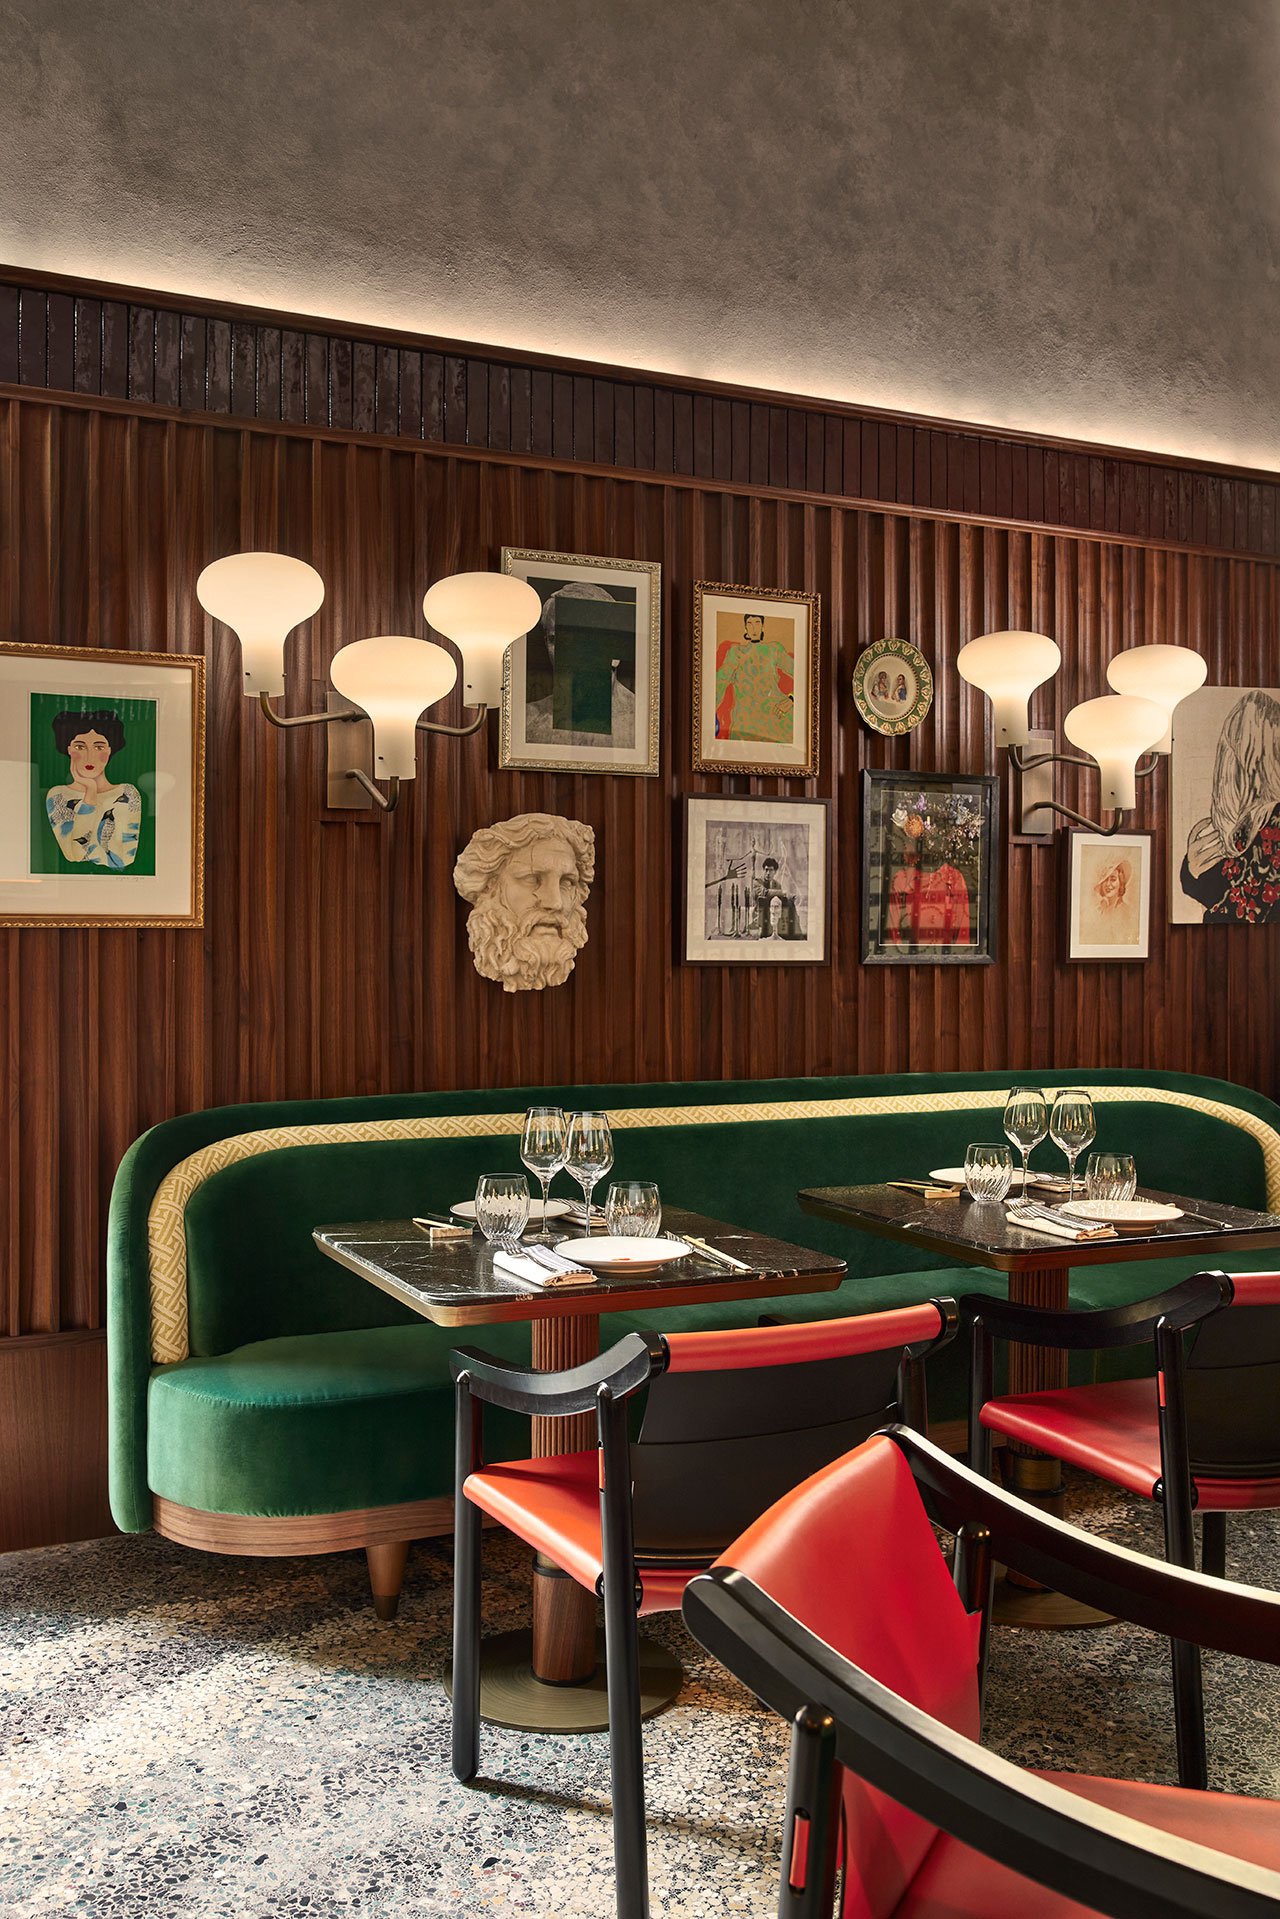 A restaurant wall featuring vintage wall lamps and an eclectic mix of art